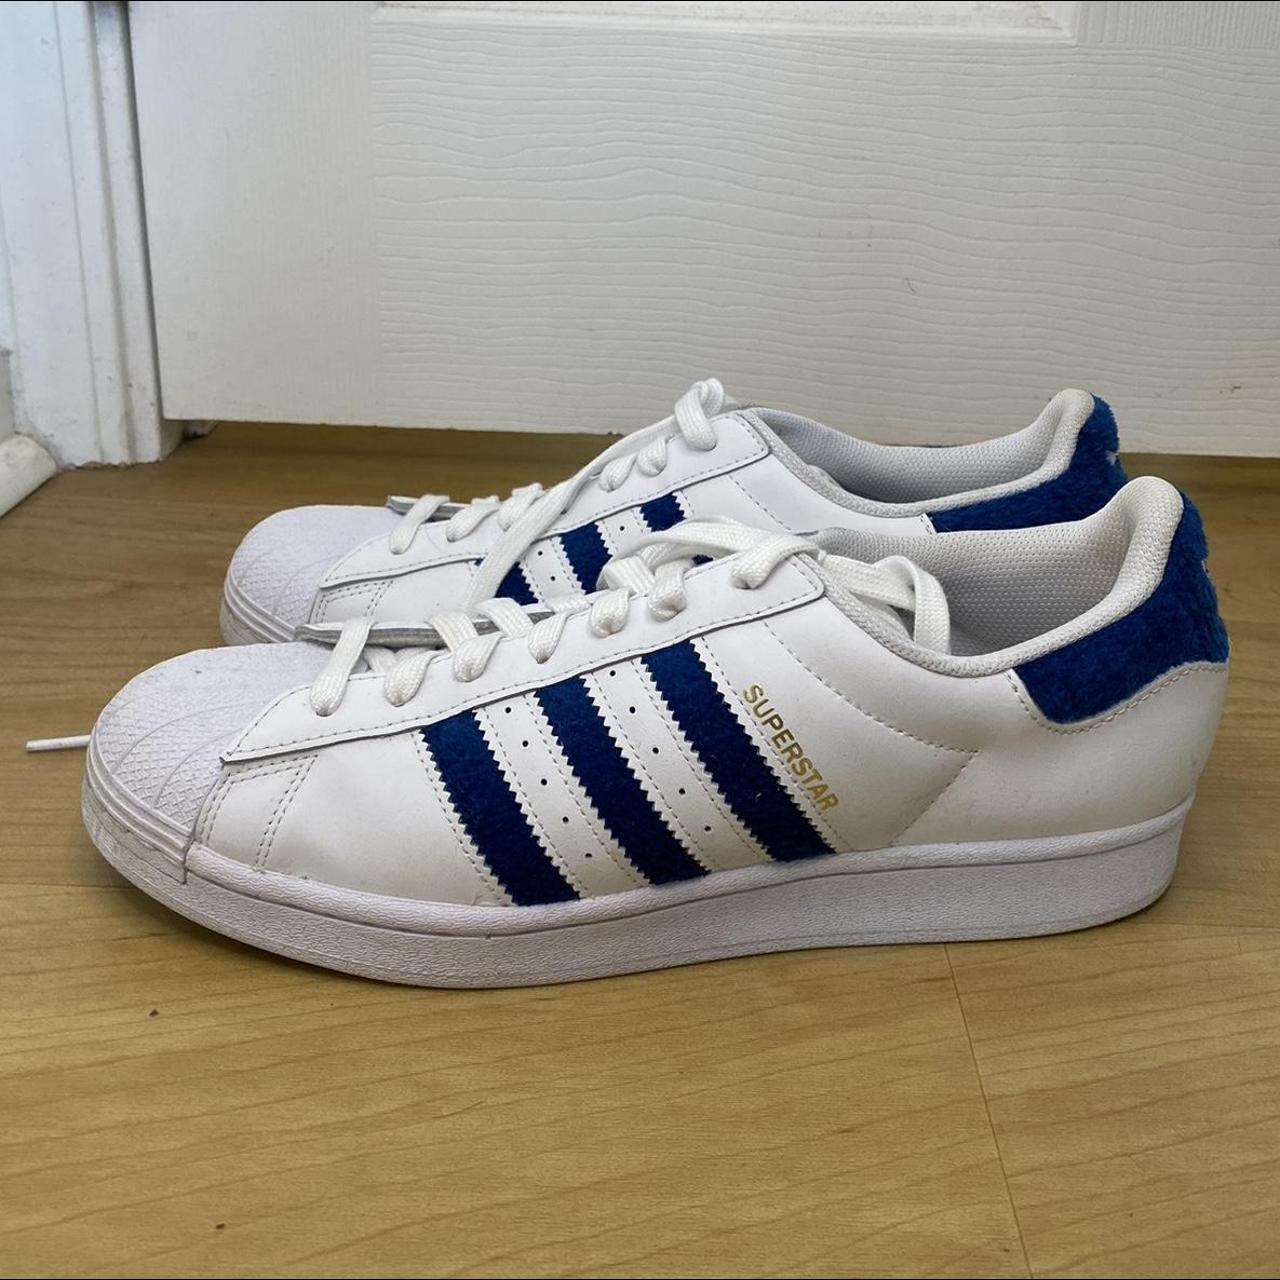 Adidas Women's White and Blue Trainers